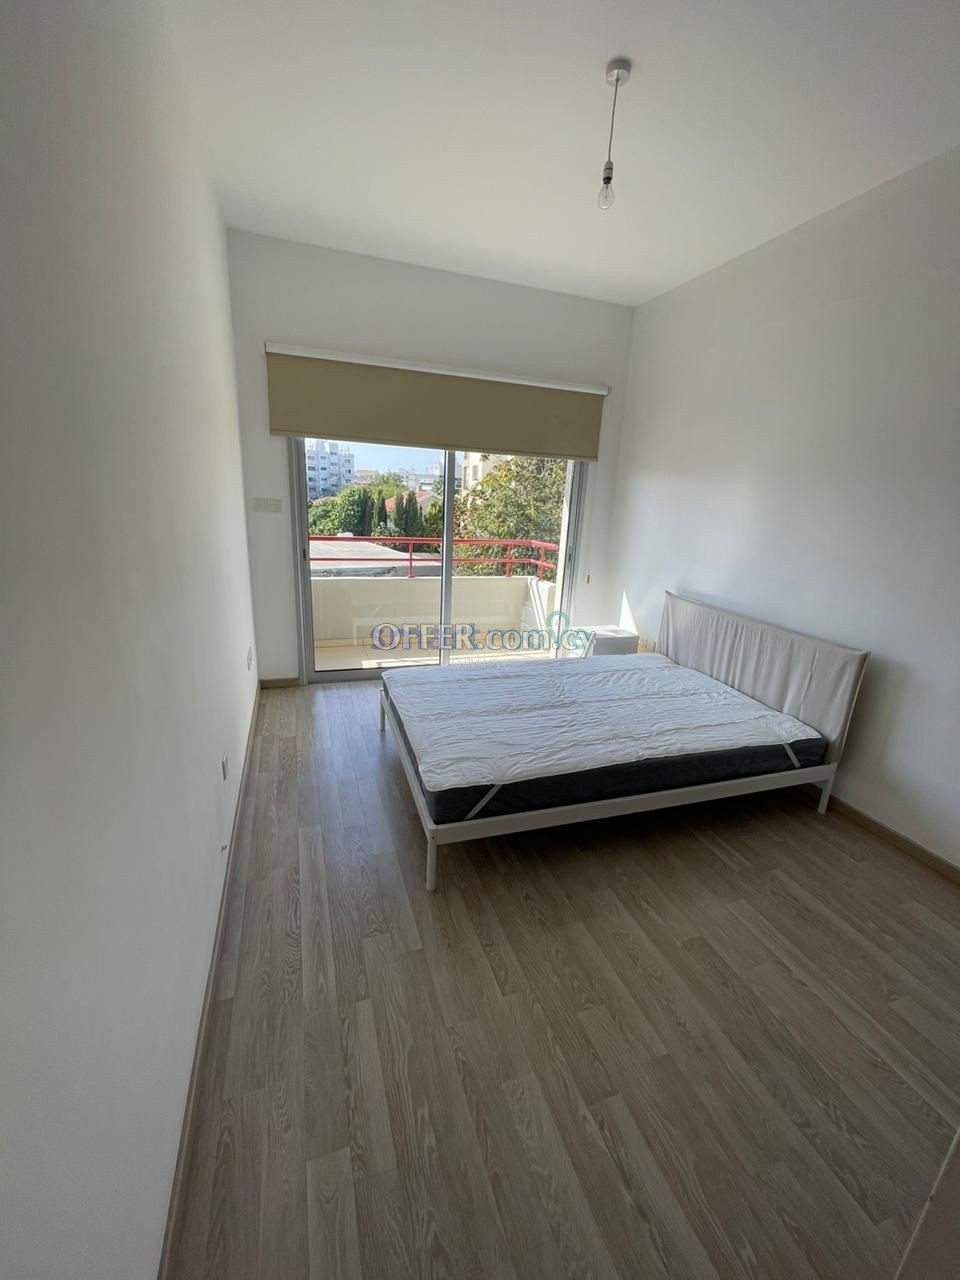 2 + 1 Bedroom Apartment For Rent Limassol - 4